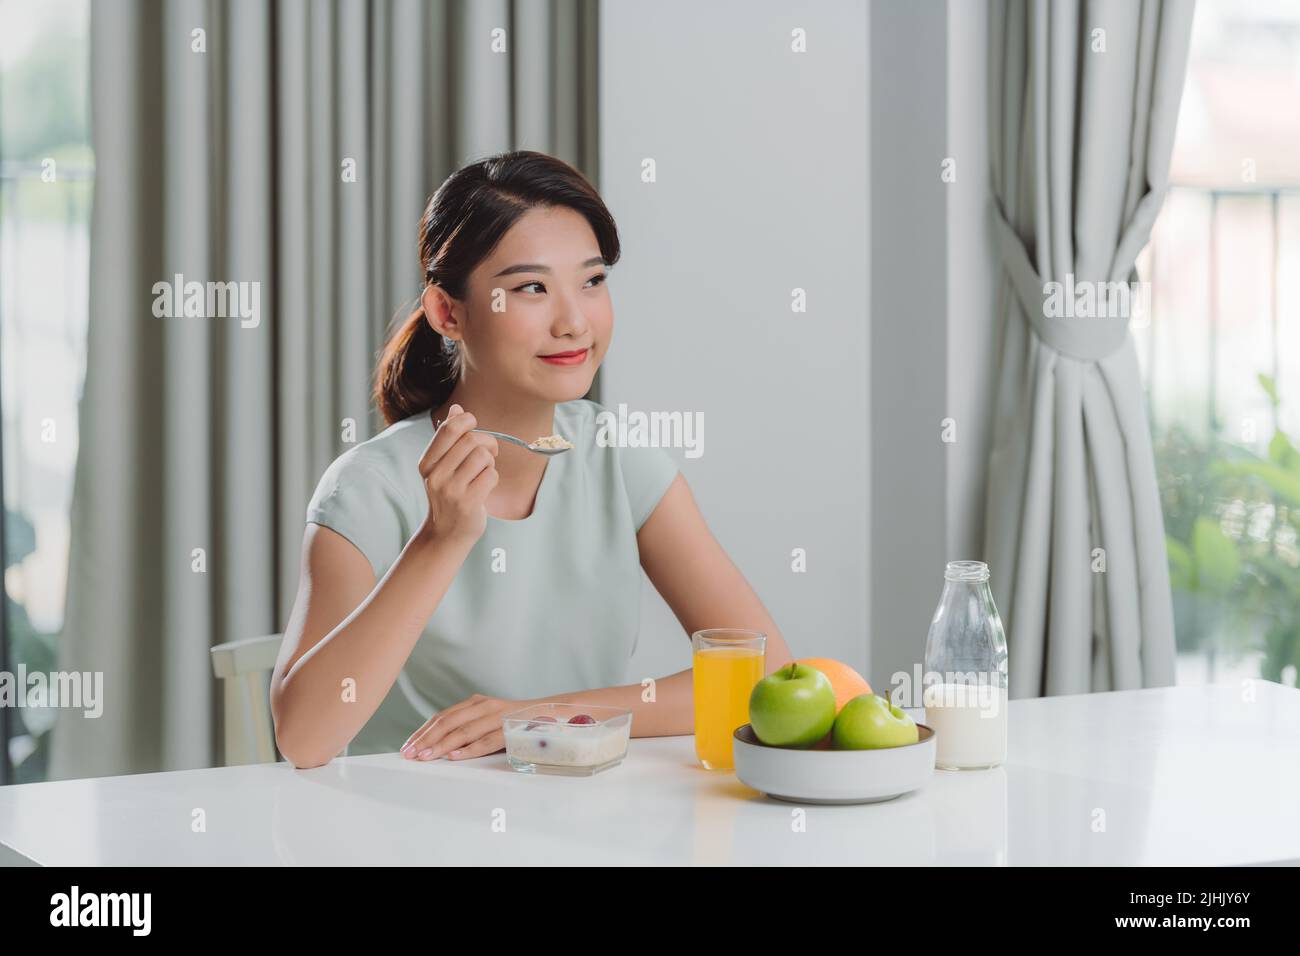 asian young woman having cereals, granola with fresh dairy milk in bowl in kitchen. Stock Photo